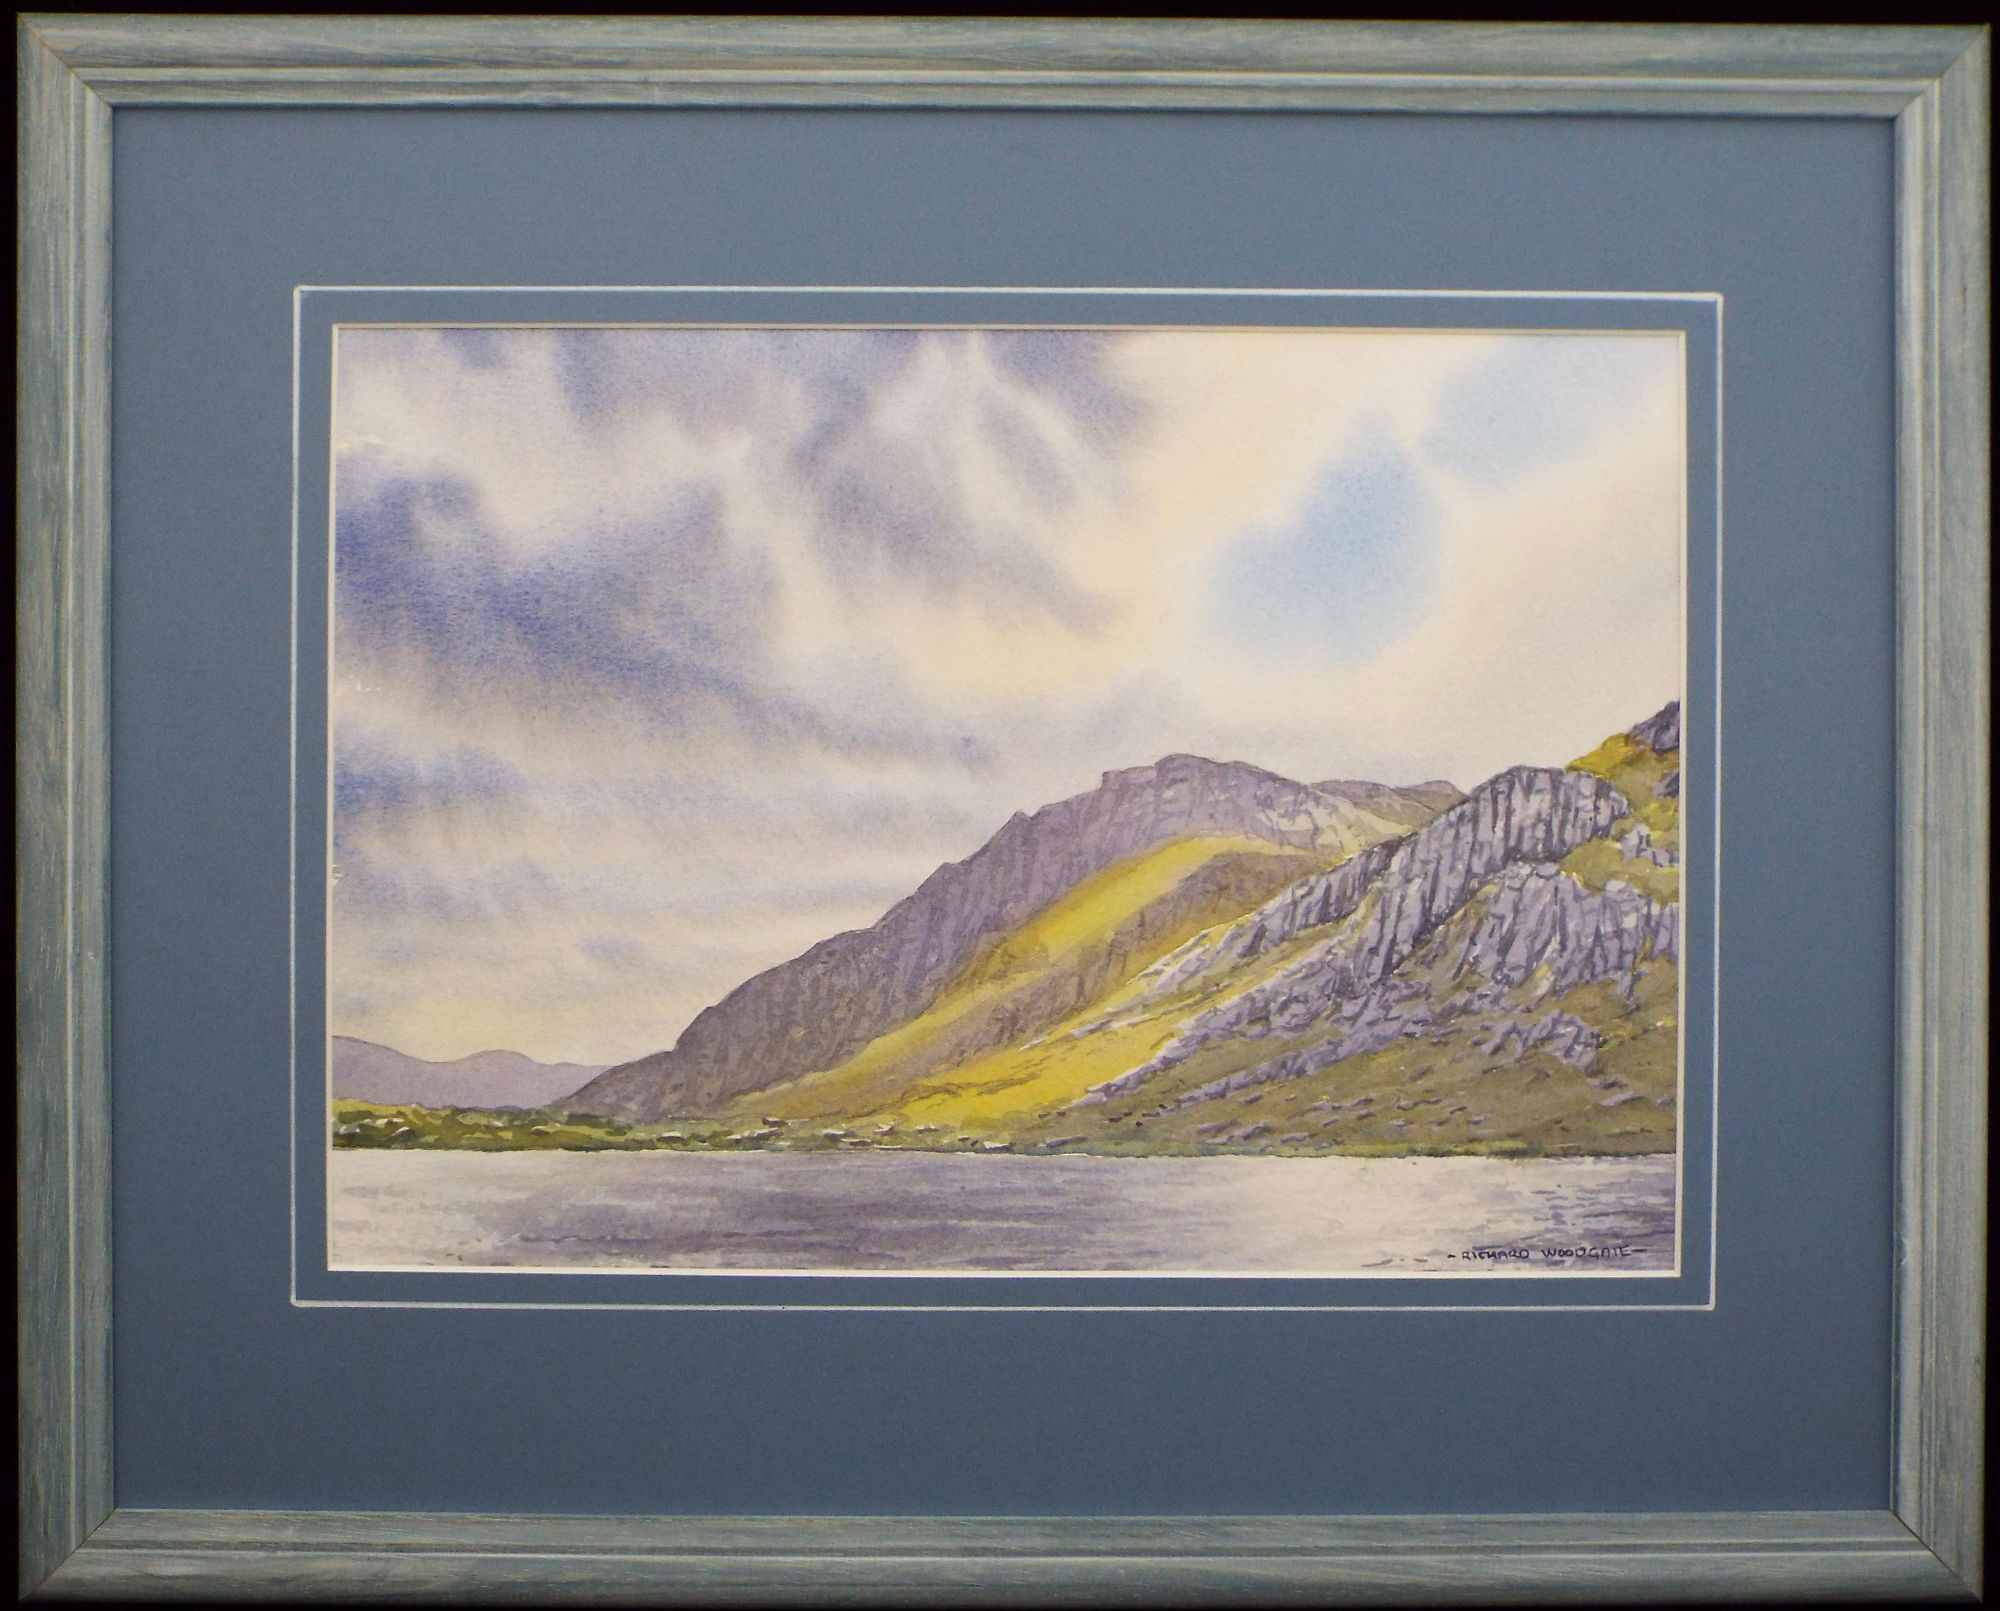 Tryfan from Lake Idwal Snowdonia by Richard Woodgate.